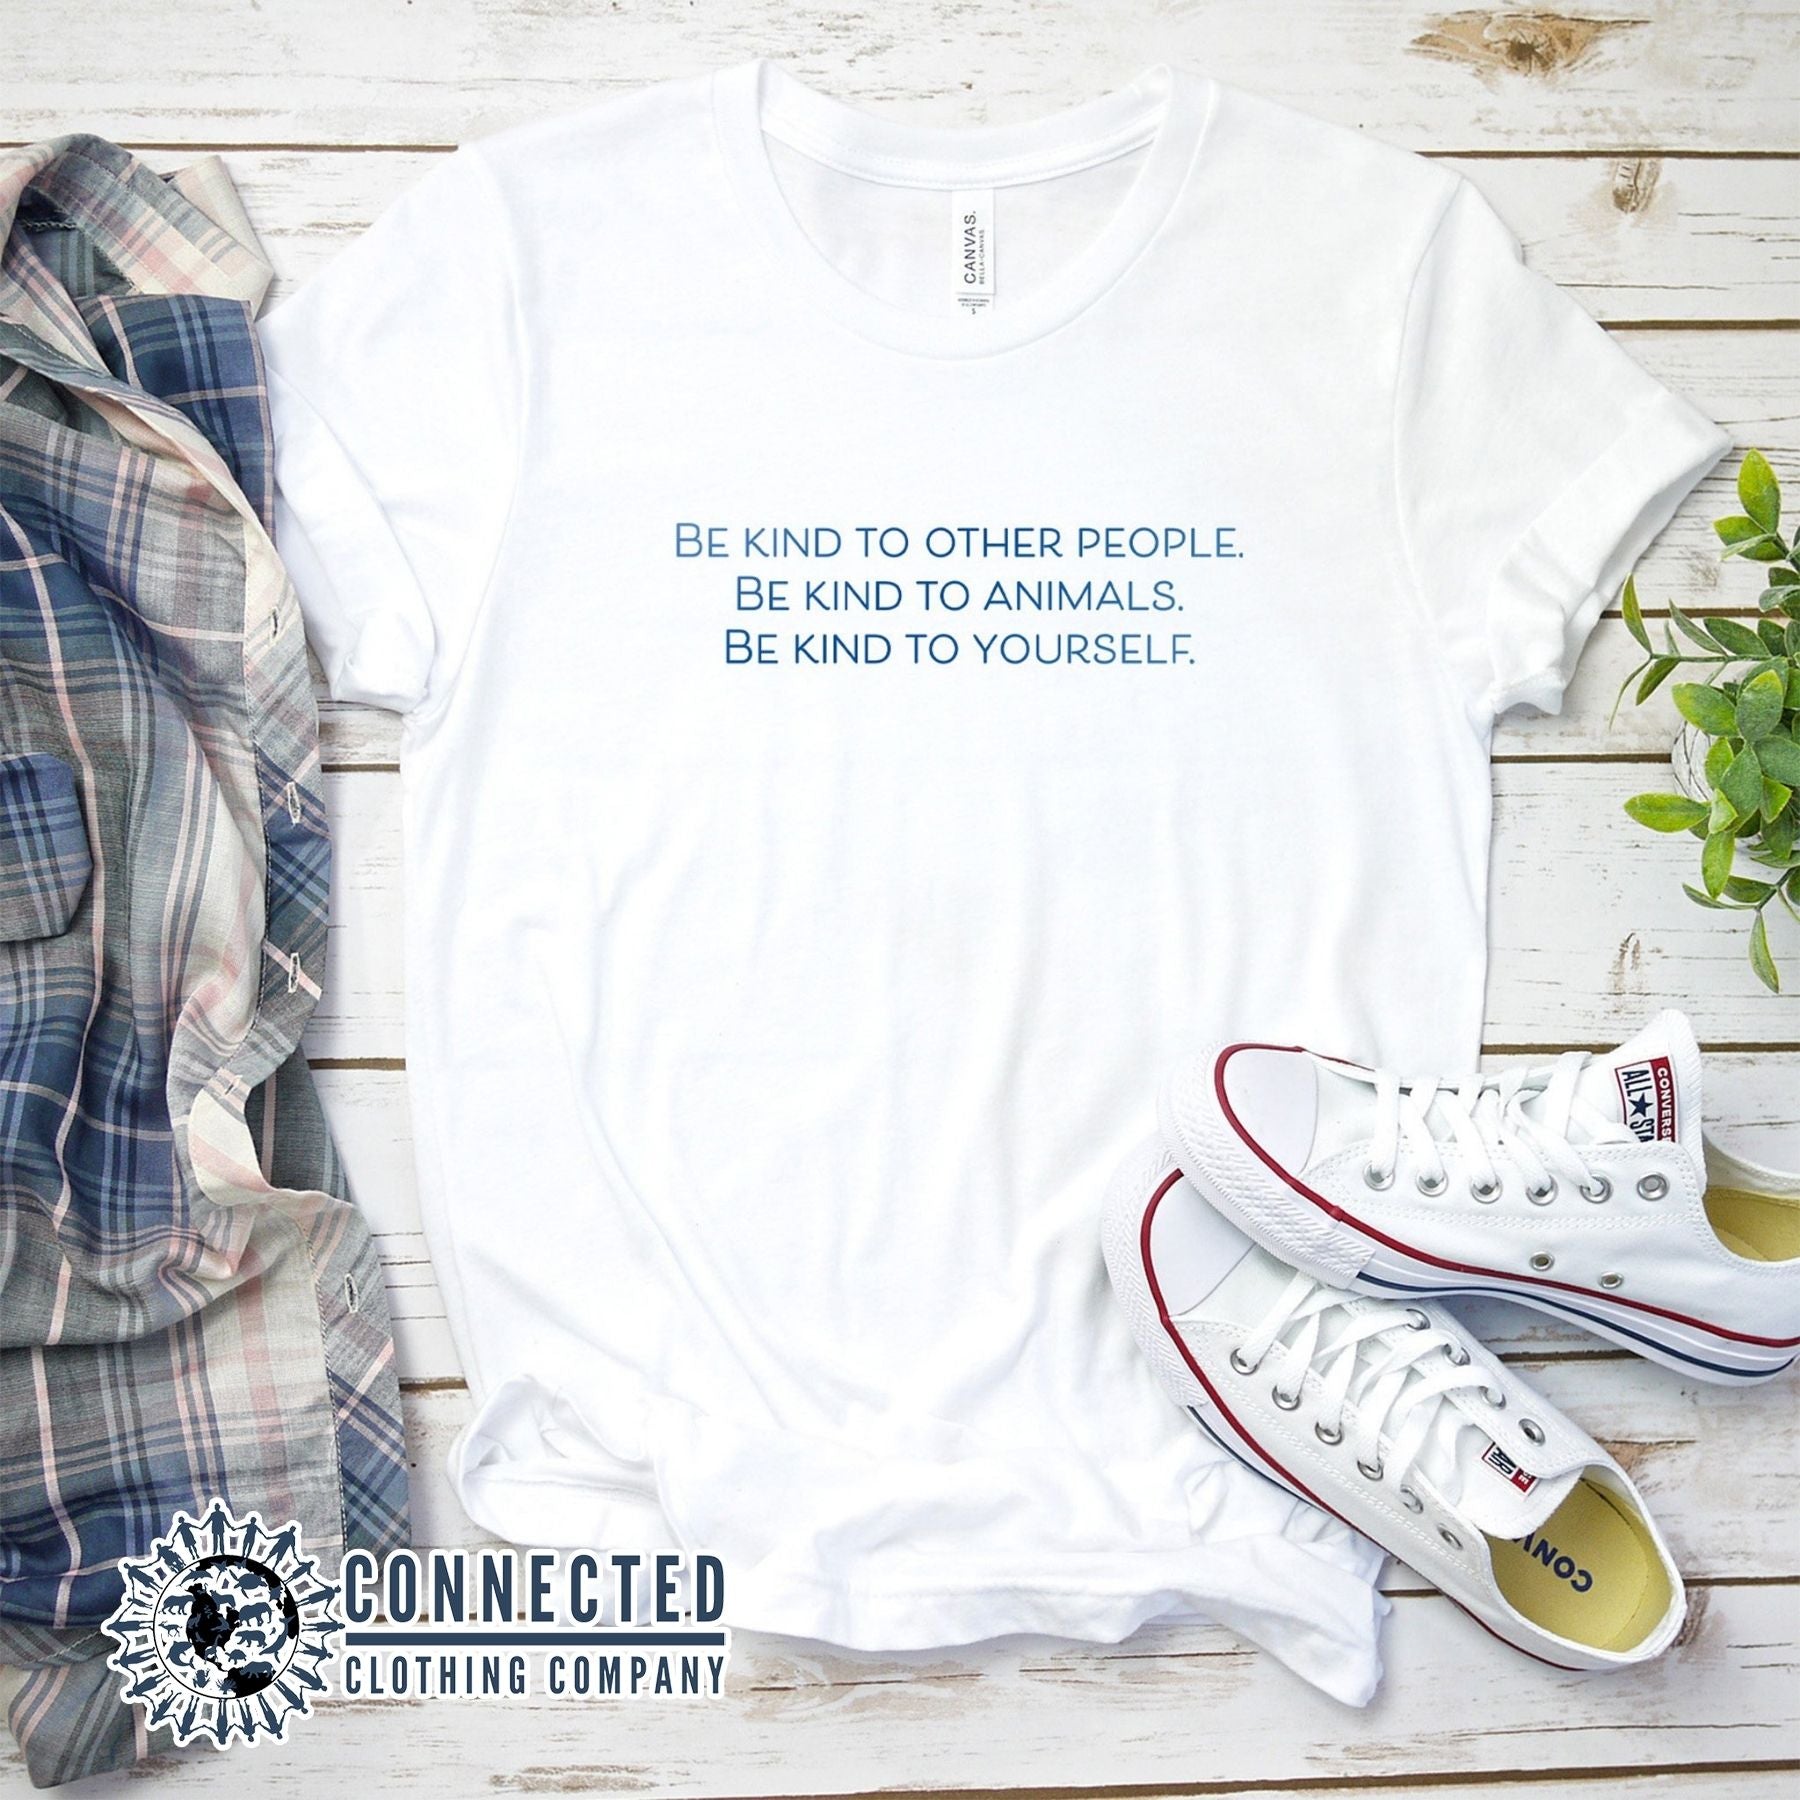 White Be Kind To All Short-Sleeve Tee - Connected Clothing Company - 10% of profits donated to ocean conservation